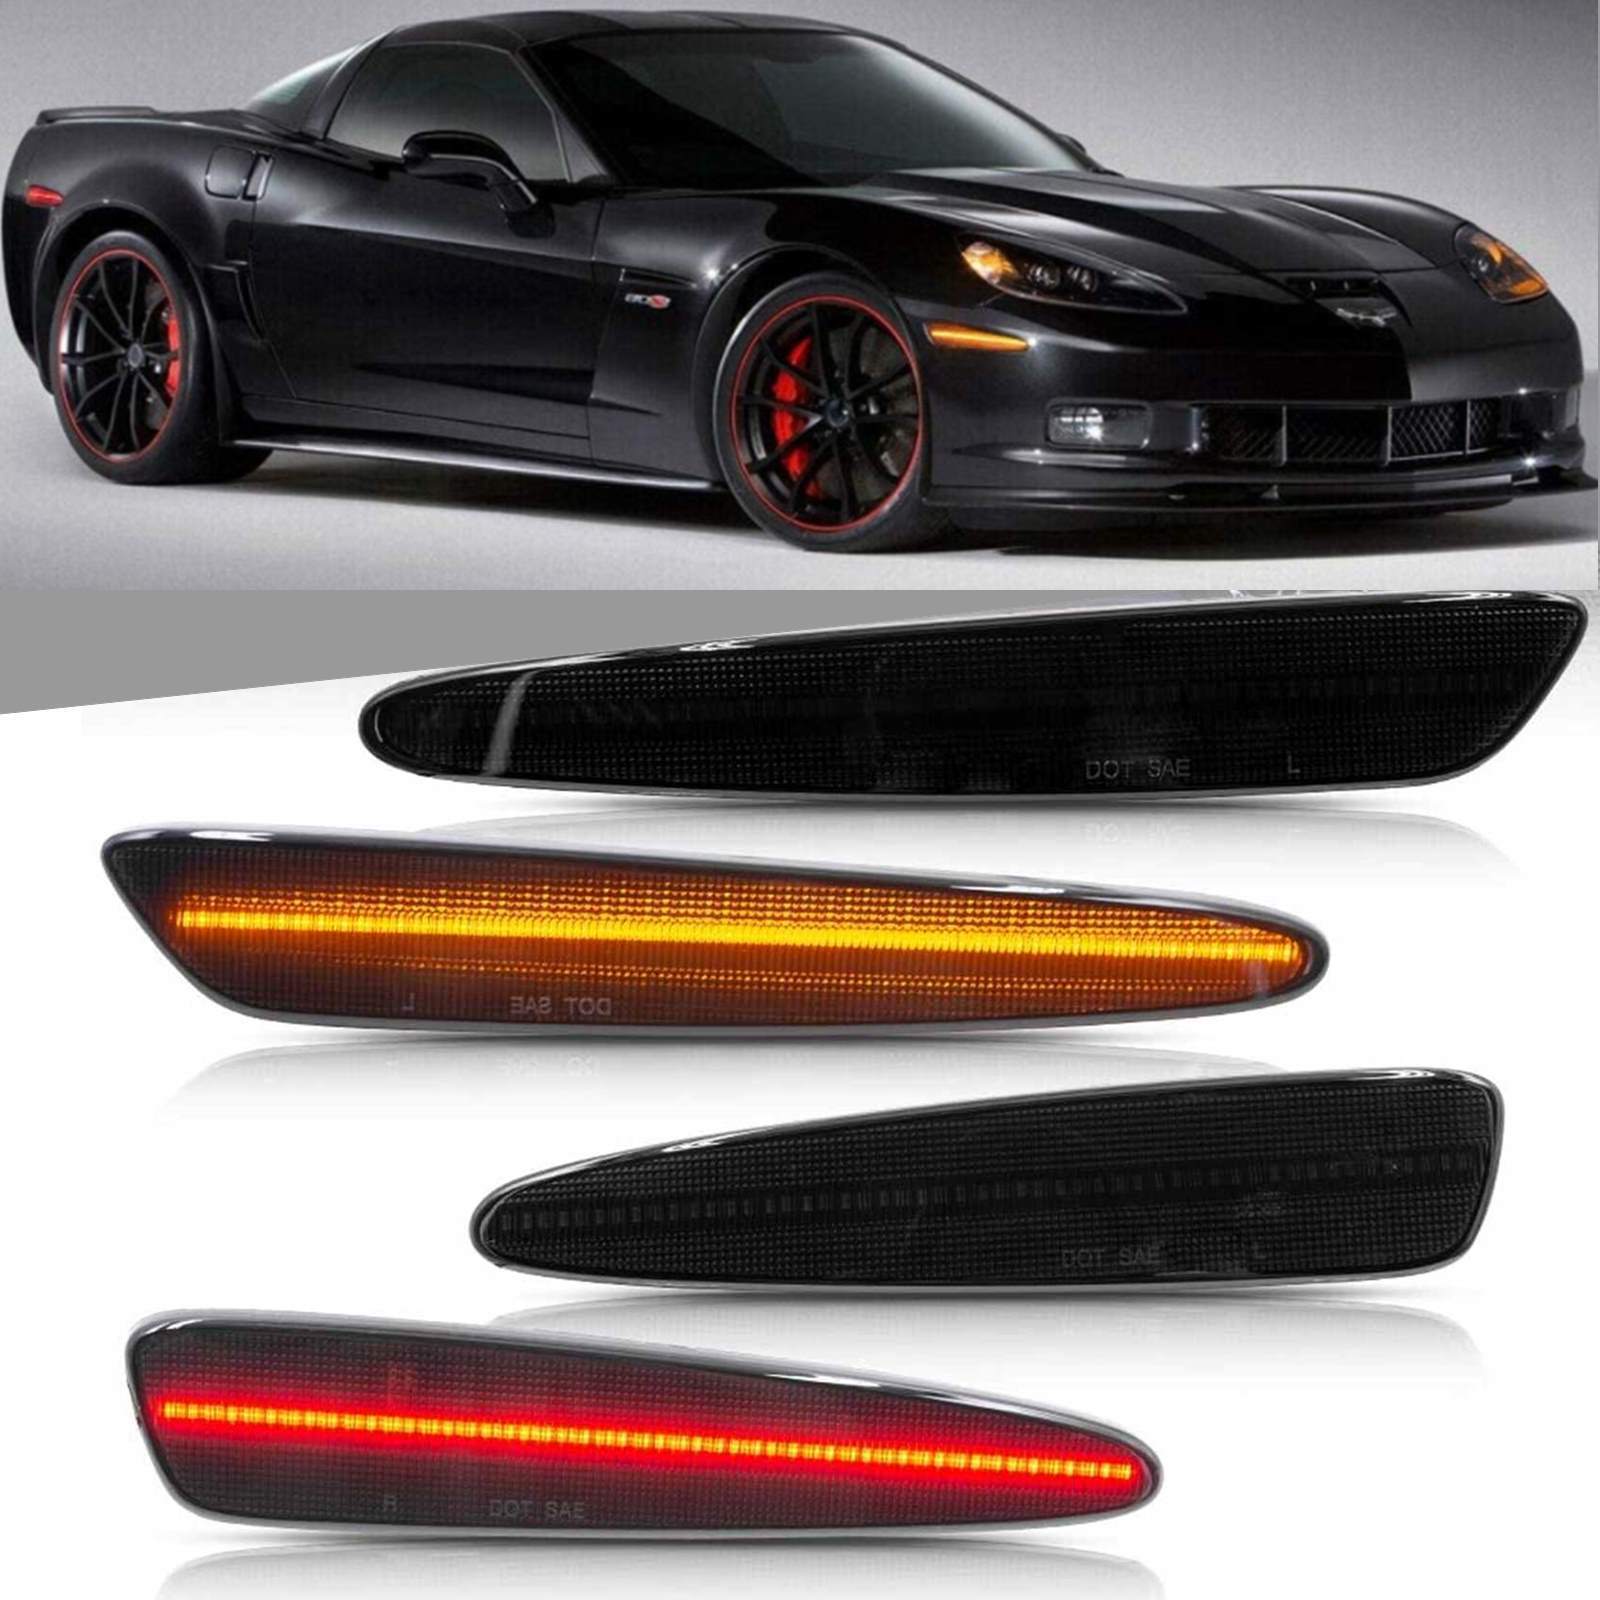 LED Side Marker Lights For 2005-13 Chevy Corvette C6 Smoked Front Rear Amber Red